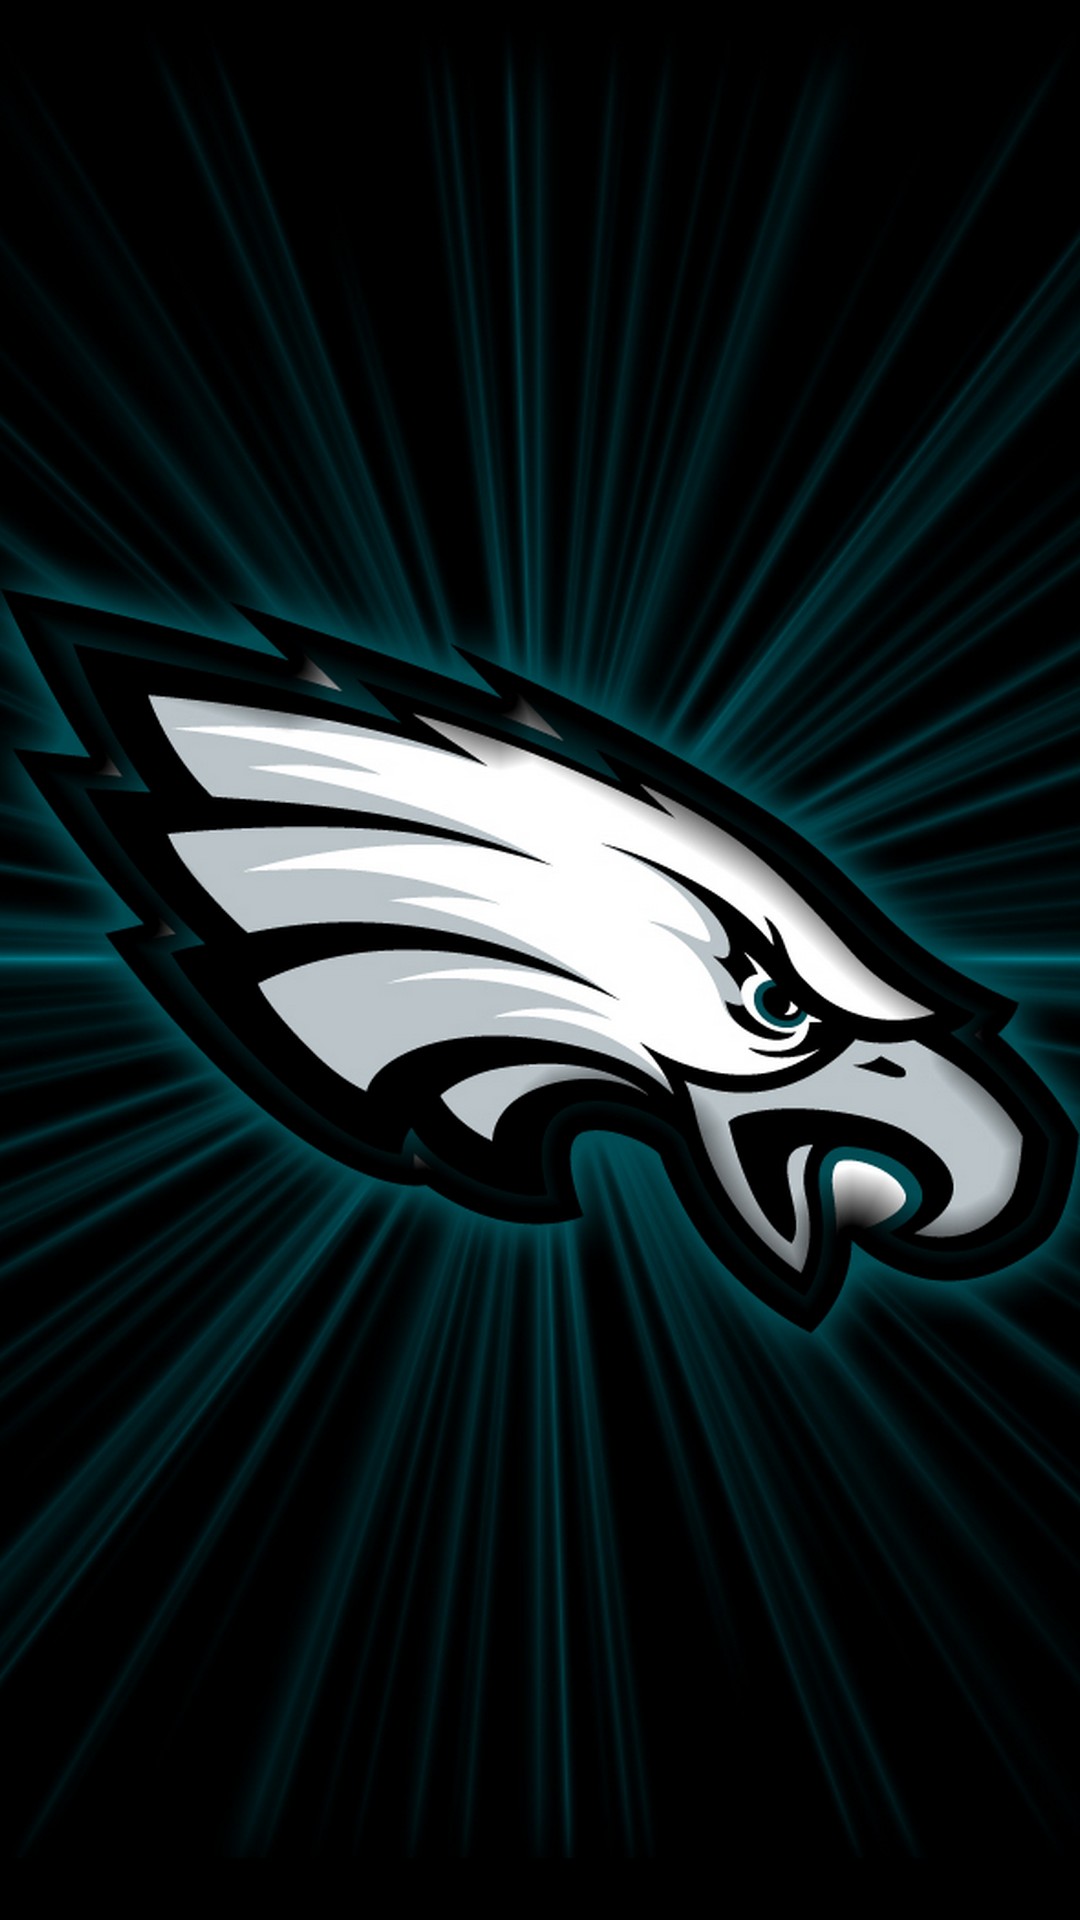 Philadelphia Eagles iPhone 6 Wallpaper With Resolution 1080X1920 pixel. You can make this wallpaper for your Mac or Windows Desktop Background, iPhone, Android or Tablet and another Smartphone device for free